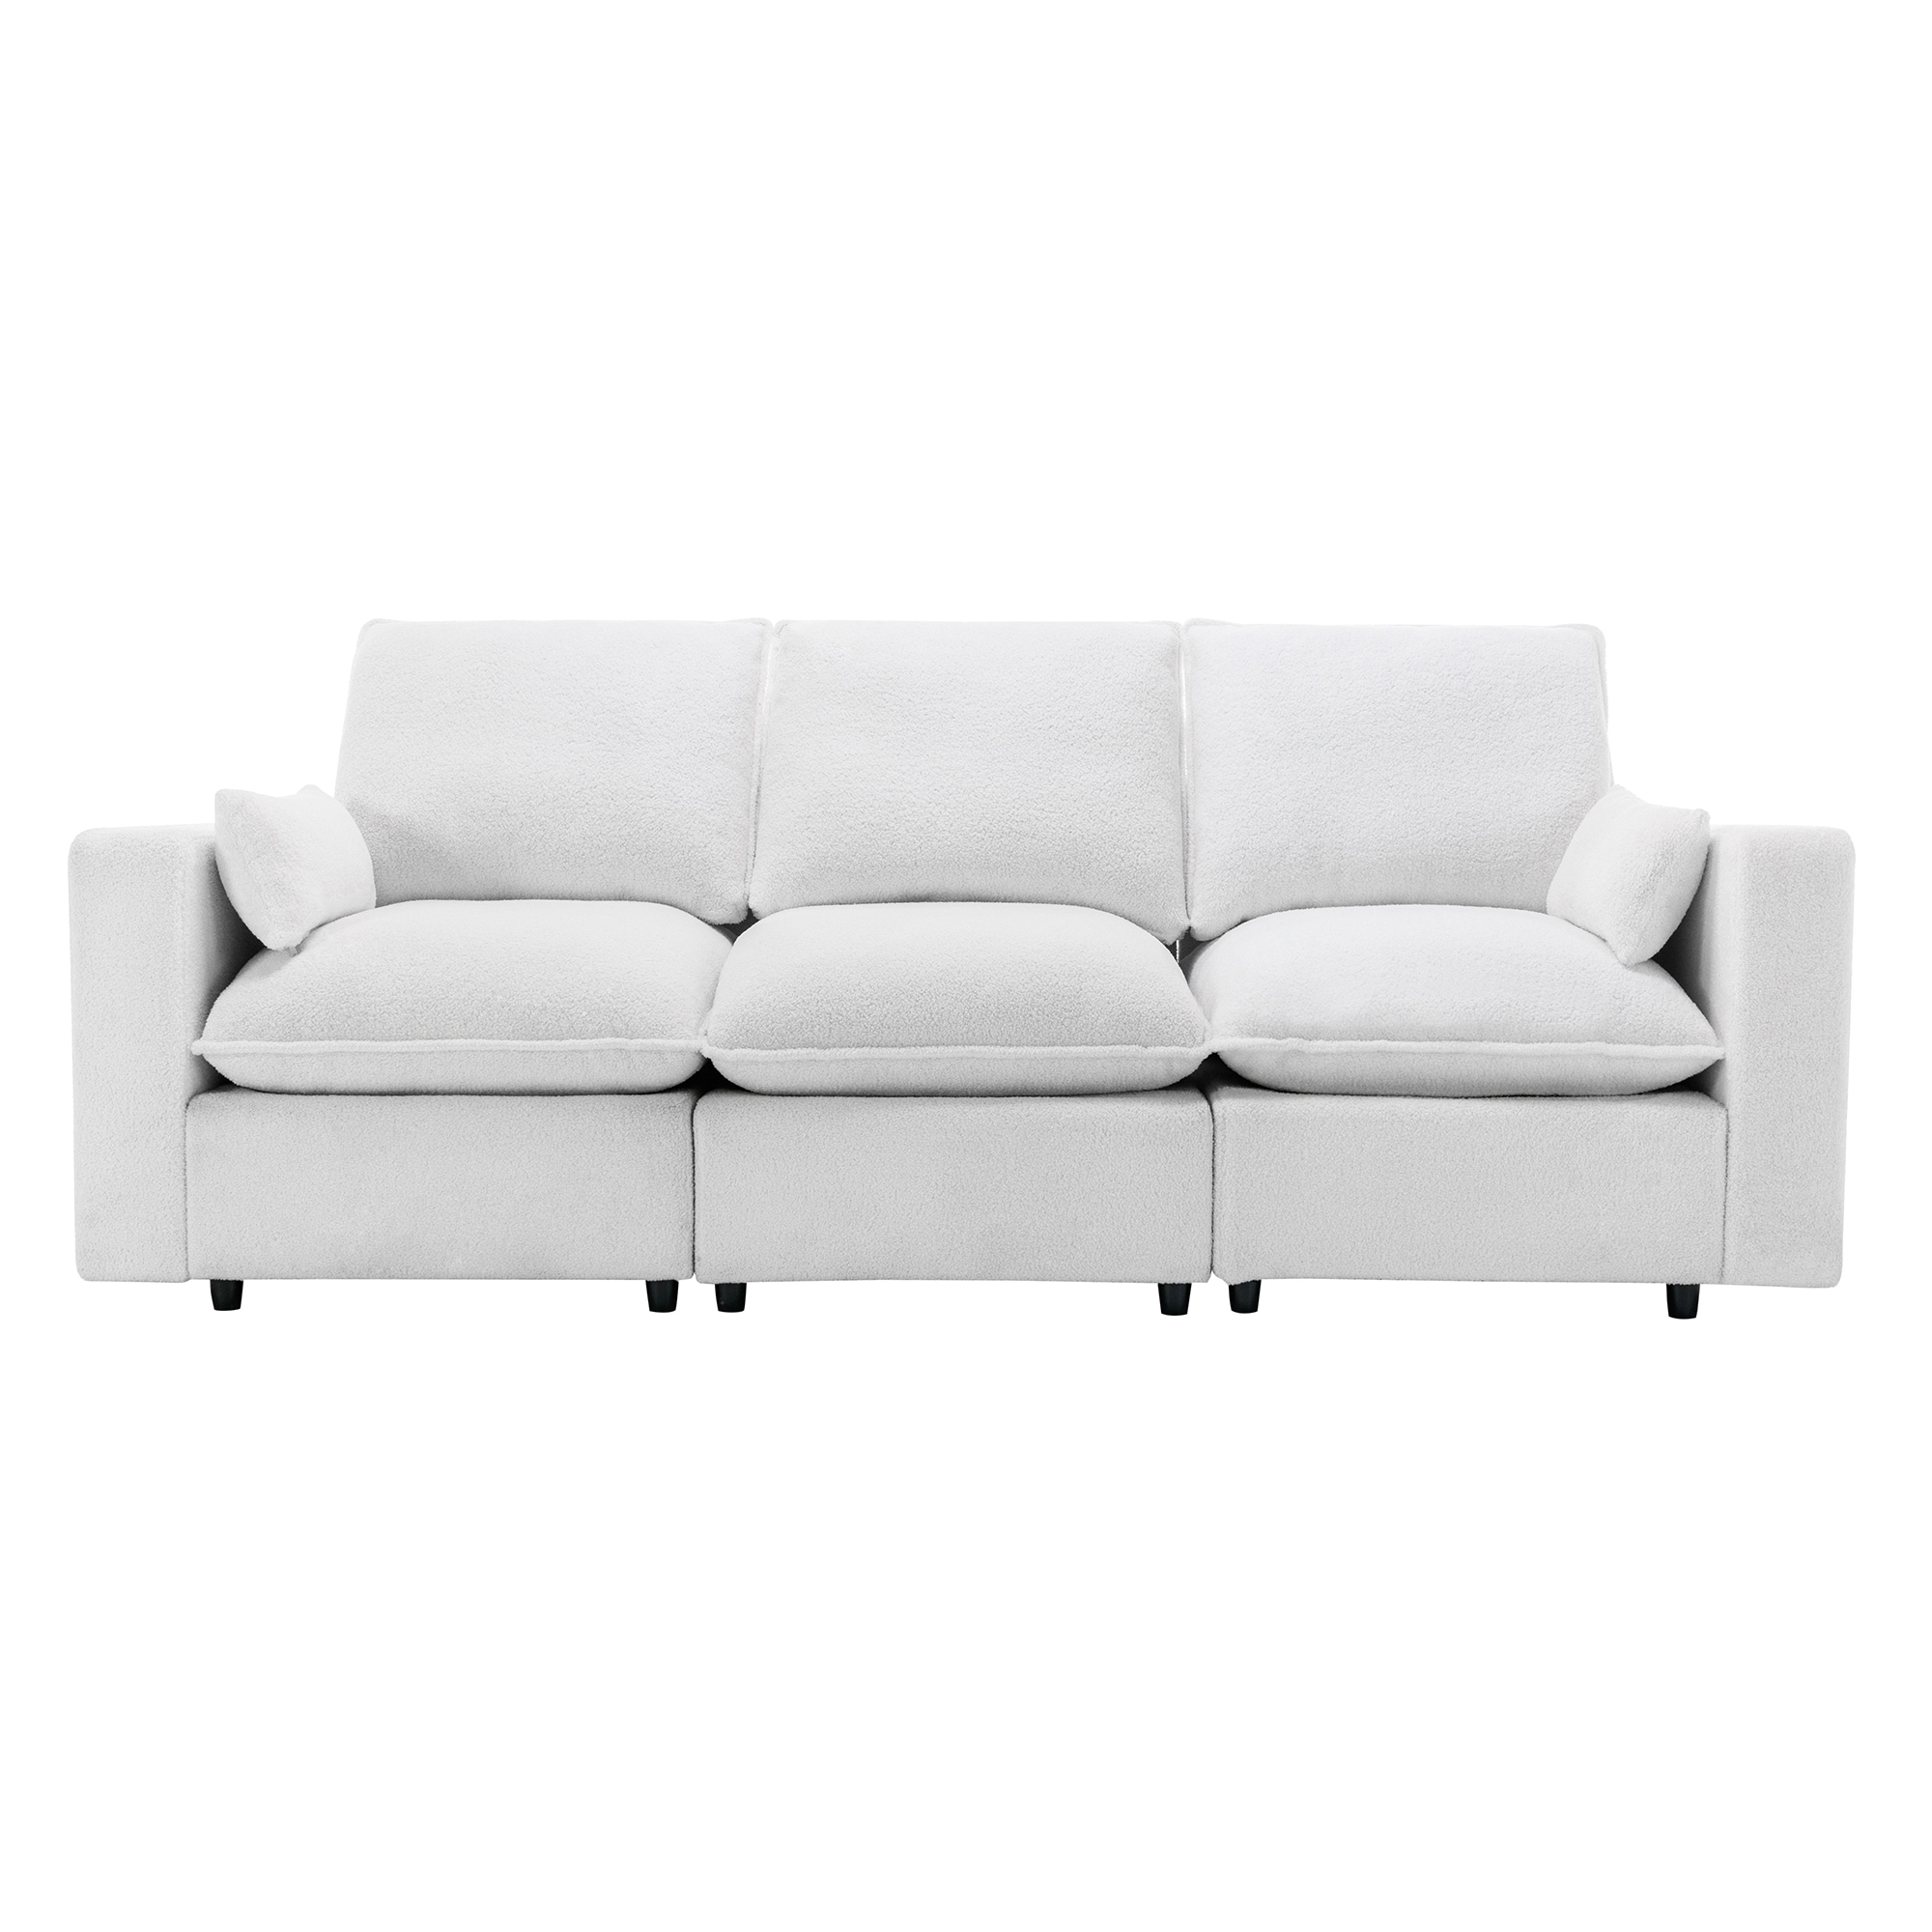 https://ak1.ostkcdn.com/images/products/is/images/direct/94927a272334c54eef662eabd9a872f20812db01/Modern-Streamline-3-Seat-Sofa-with-Lumbar-Support.jpg